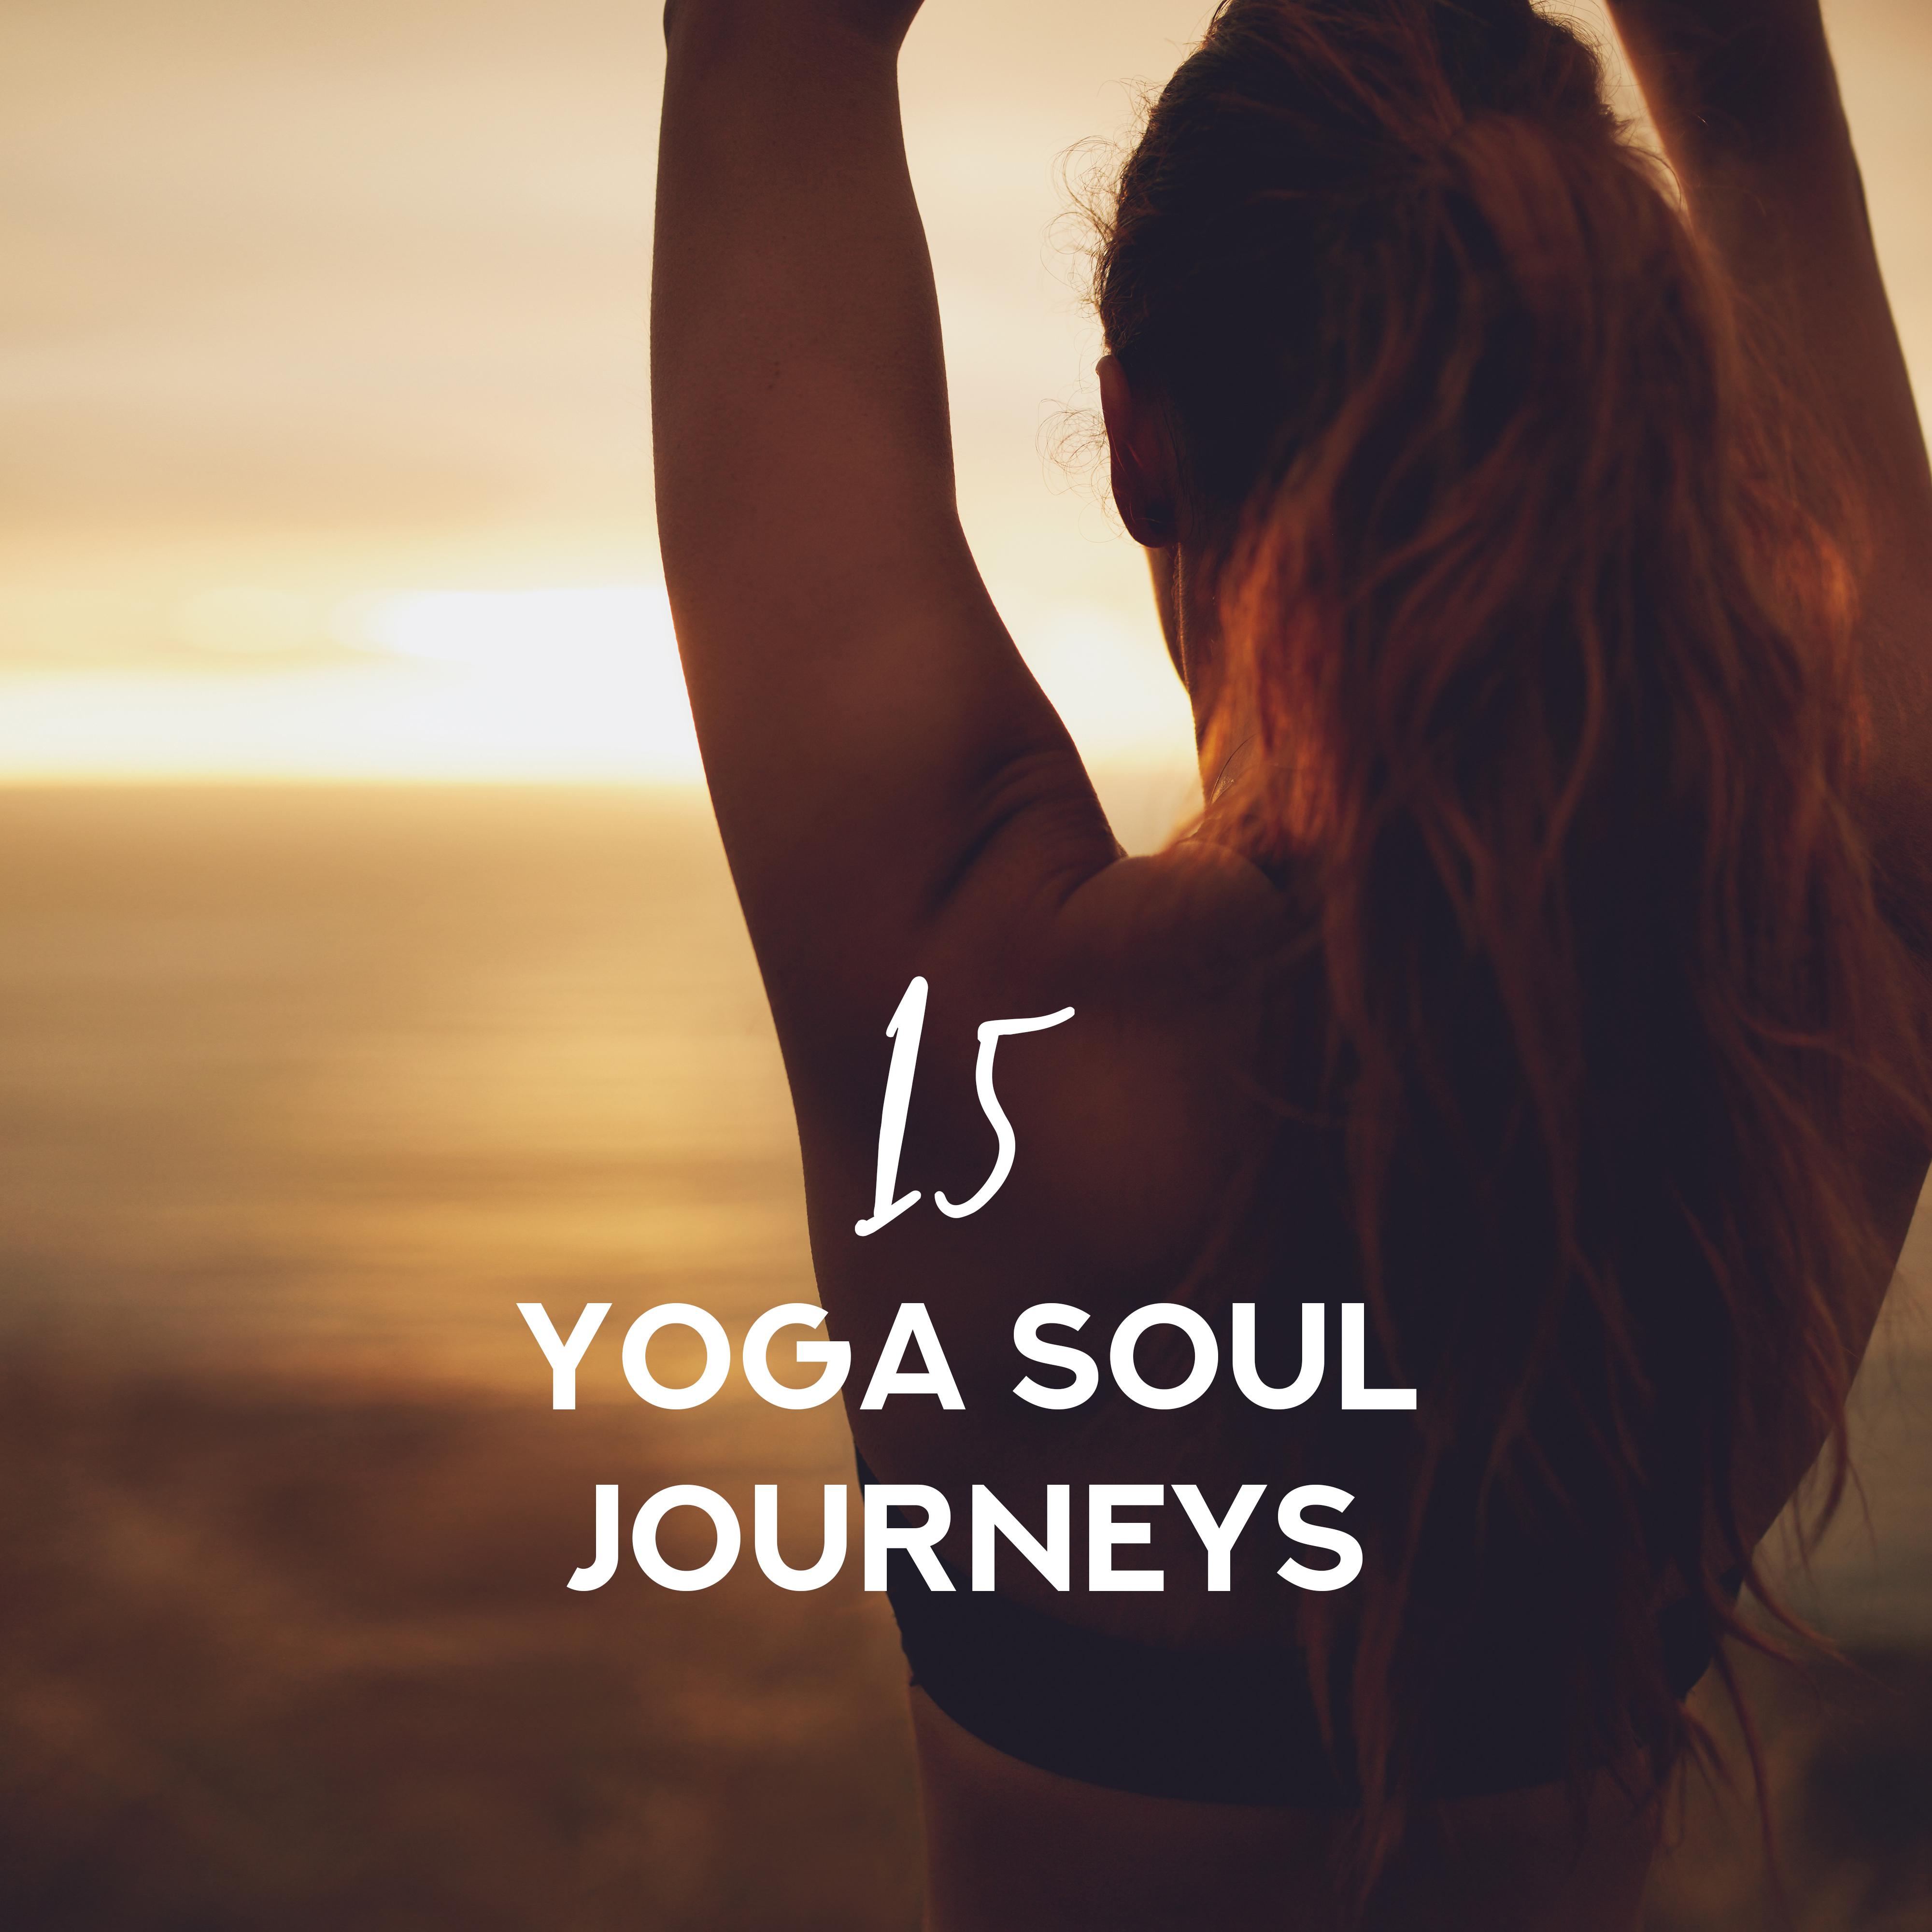 15 Yoga Soul Journeys: 2019 Deep Ambient New Age Music for Meditation & Relaxation, Long Contemplation Background Melodies, Healing Sounds for Body & Soul, Inner Balance, Vital Energy Increase